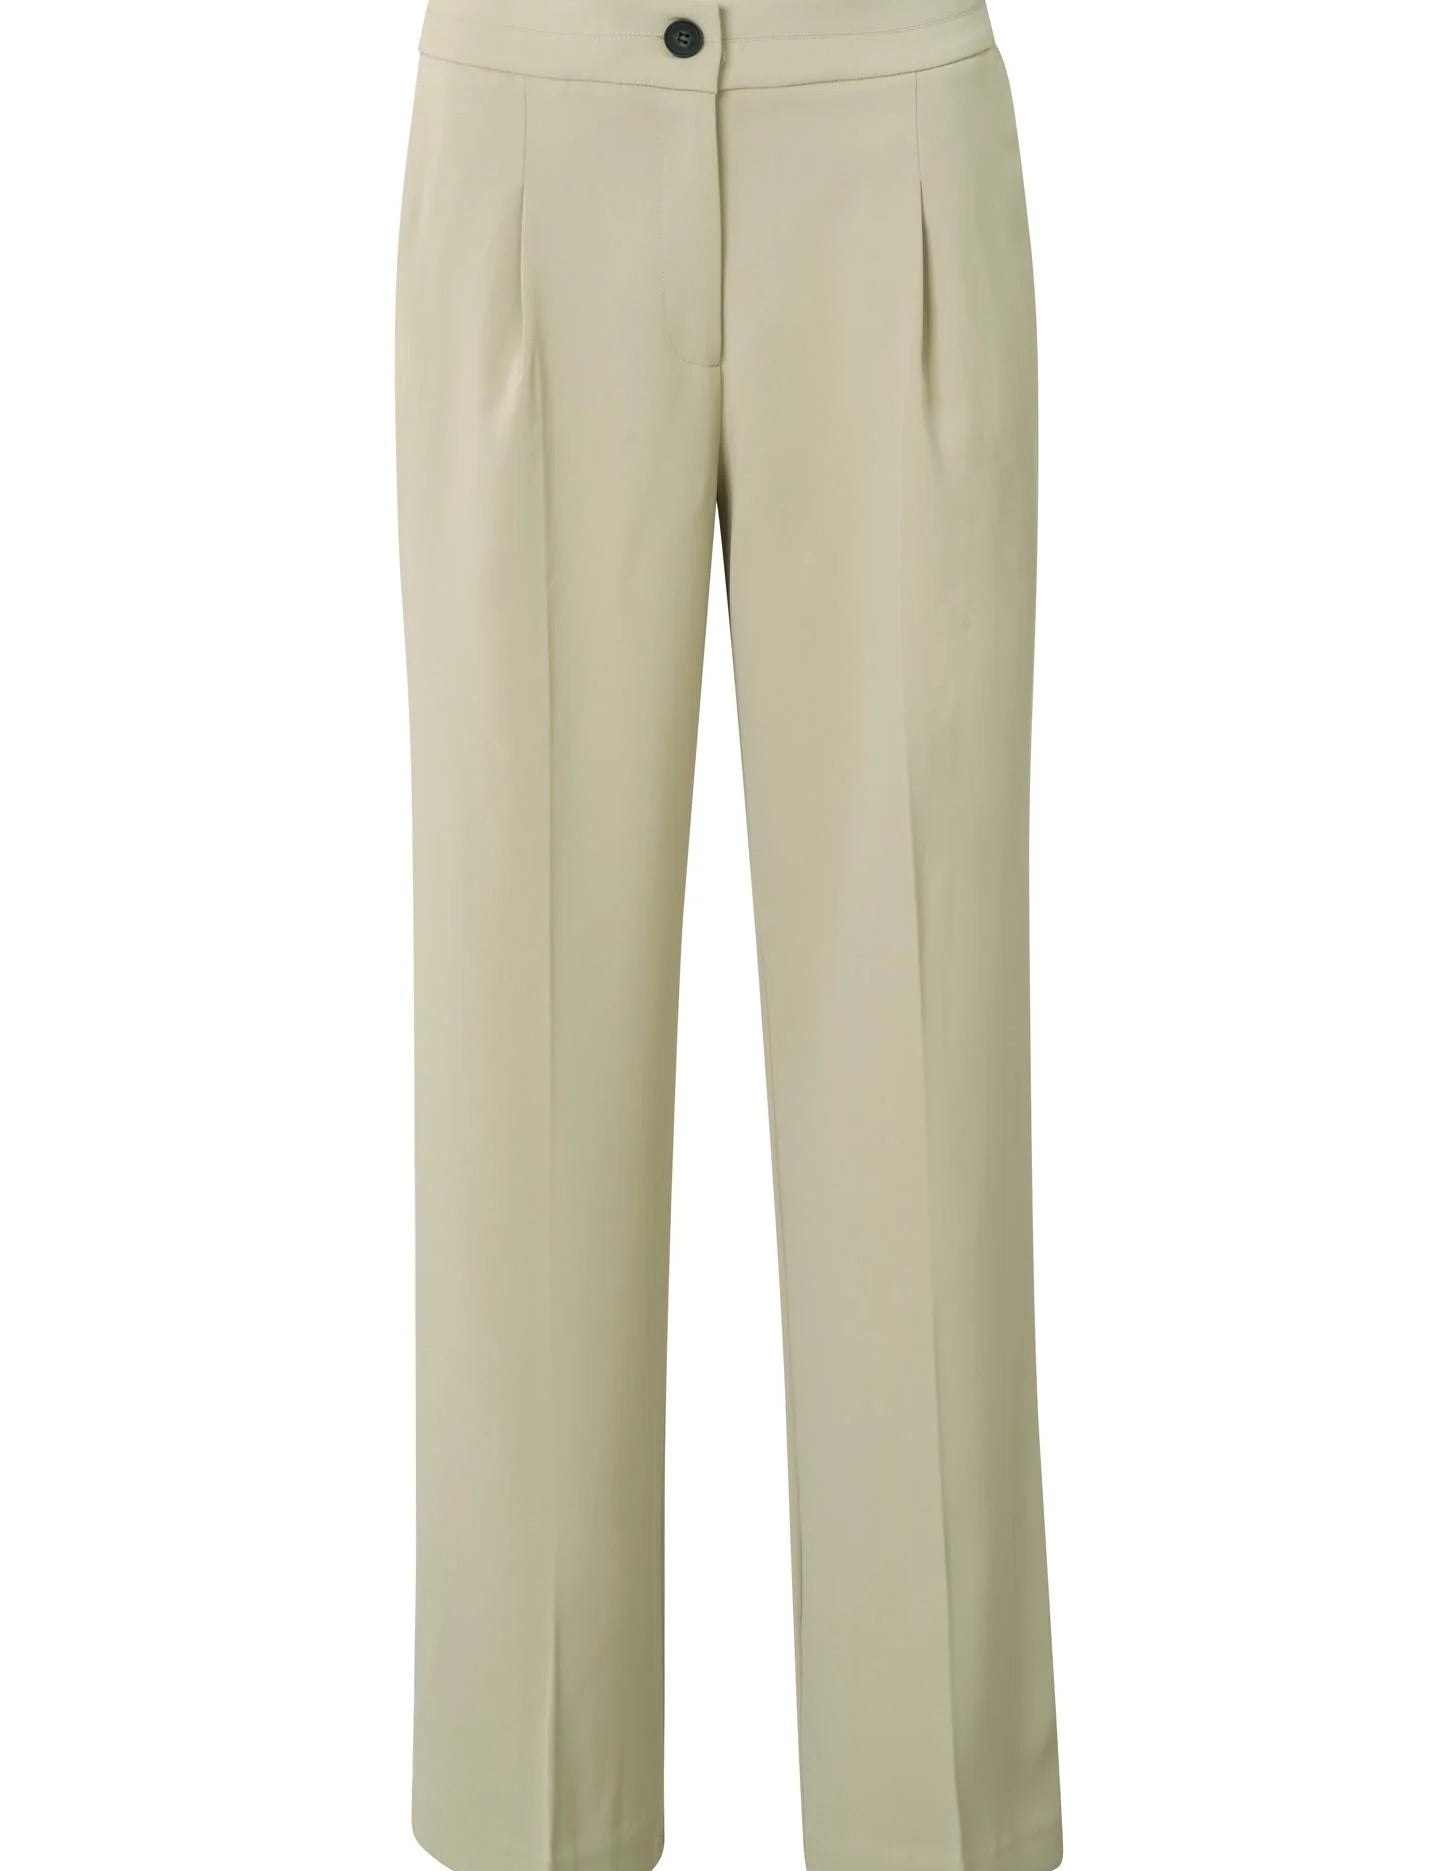 woven-wide-leg-trousers-with-pockets-and-pleated-details-eucalyptus-green_ca2f158e-6860-409d-9ac7-d74690a3f8bb_2880x_jpg.jpg